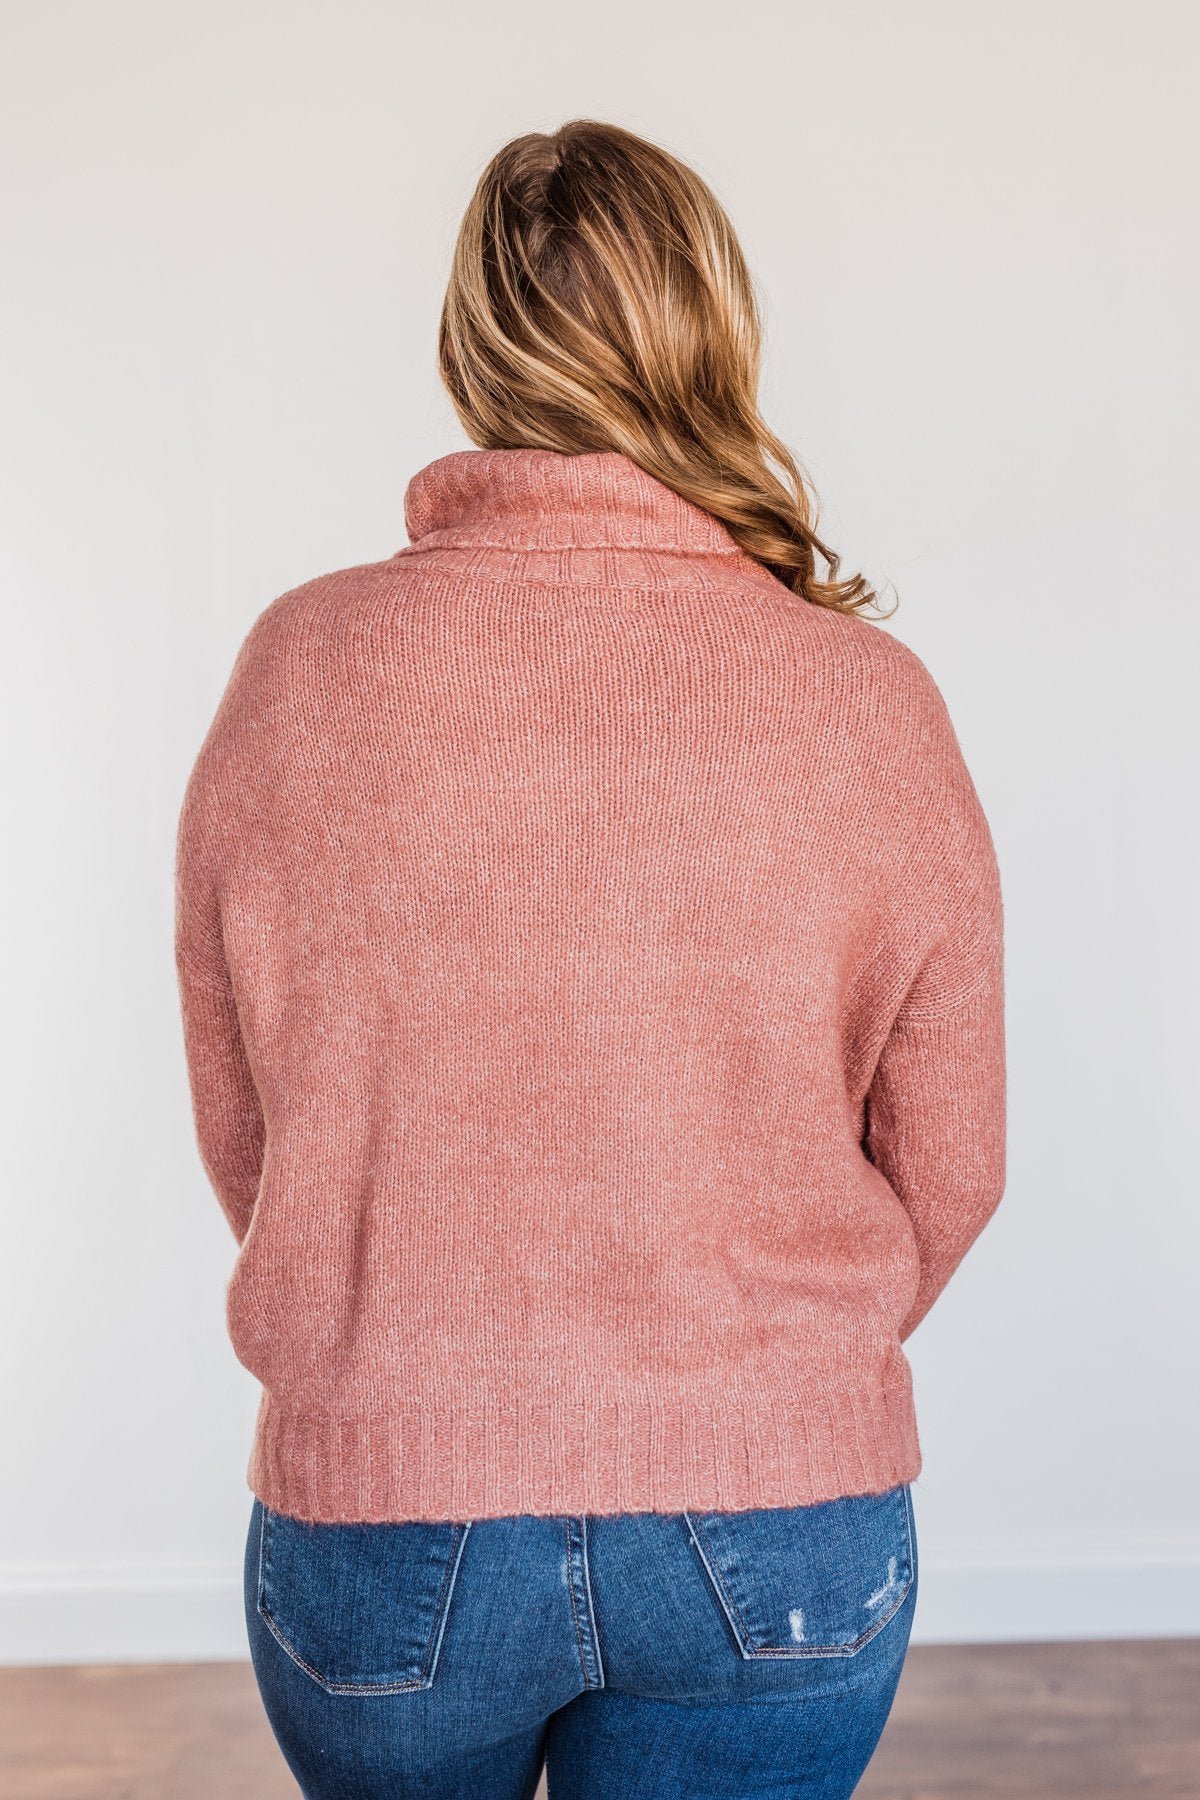 Greatest Blessings Knit Cowl Neck Sweater- Mauve